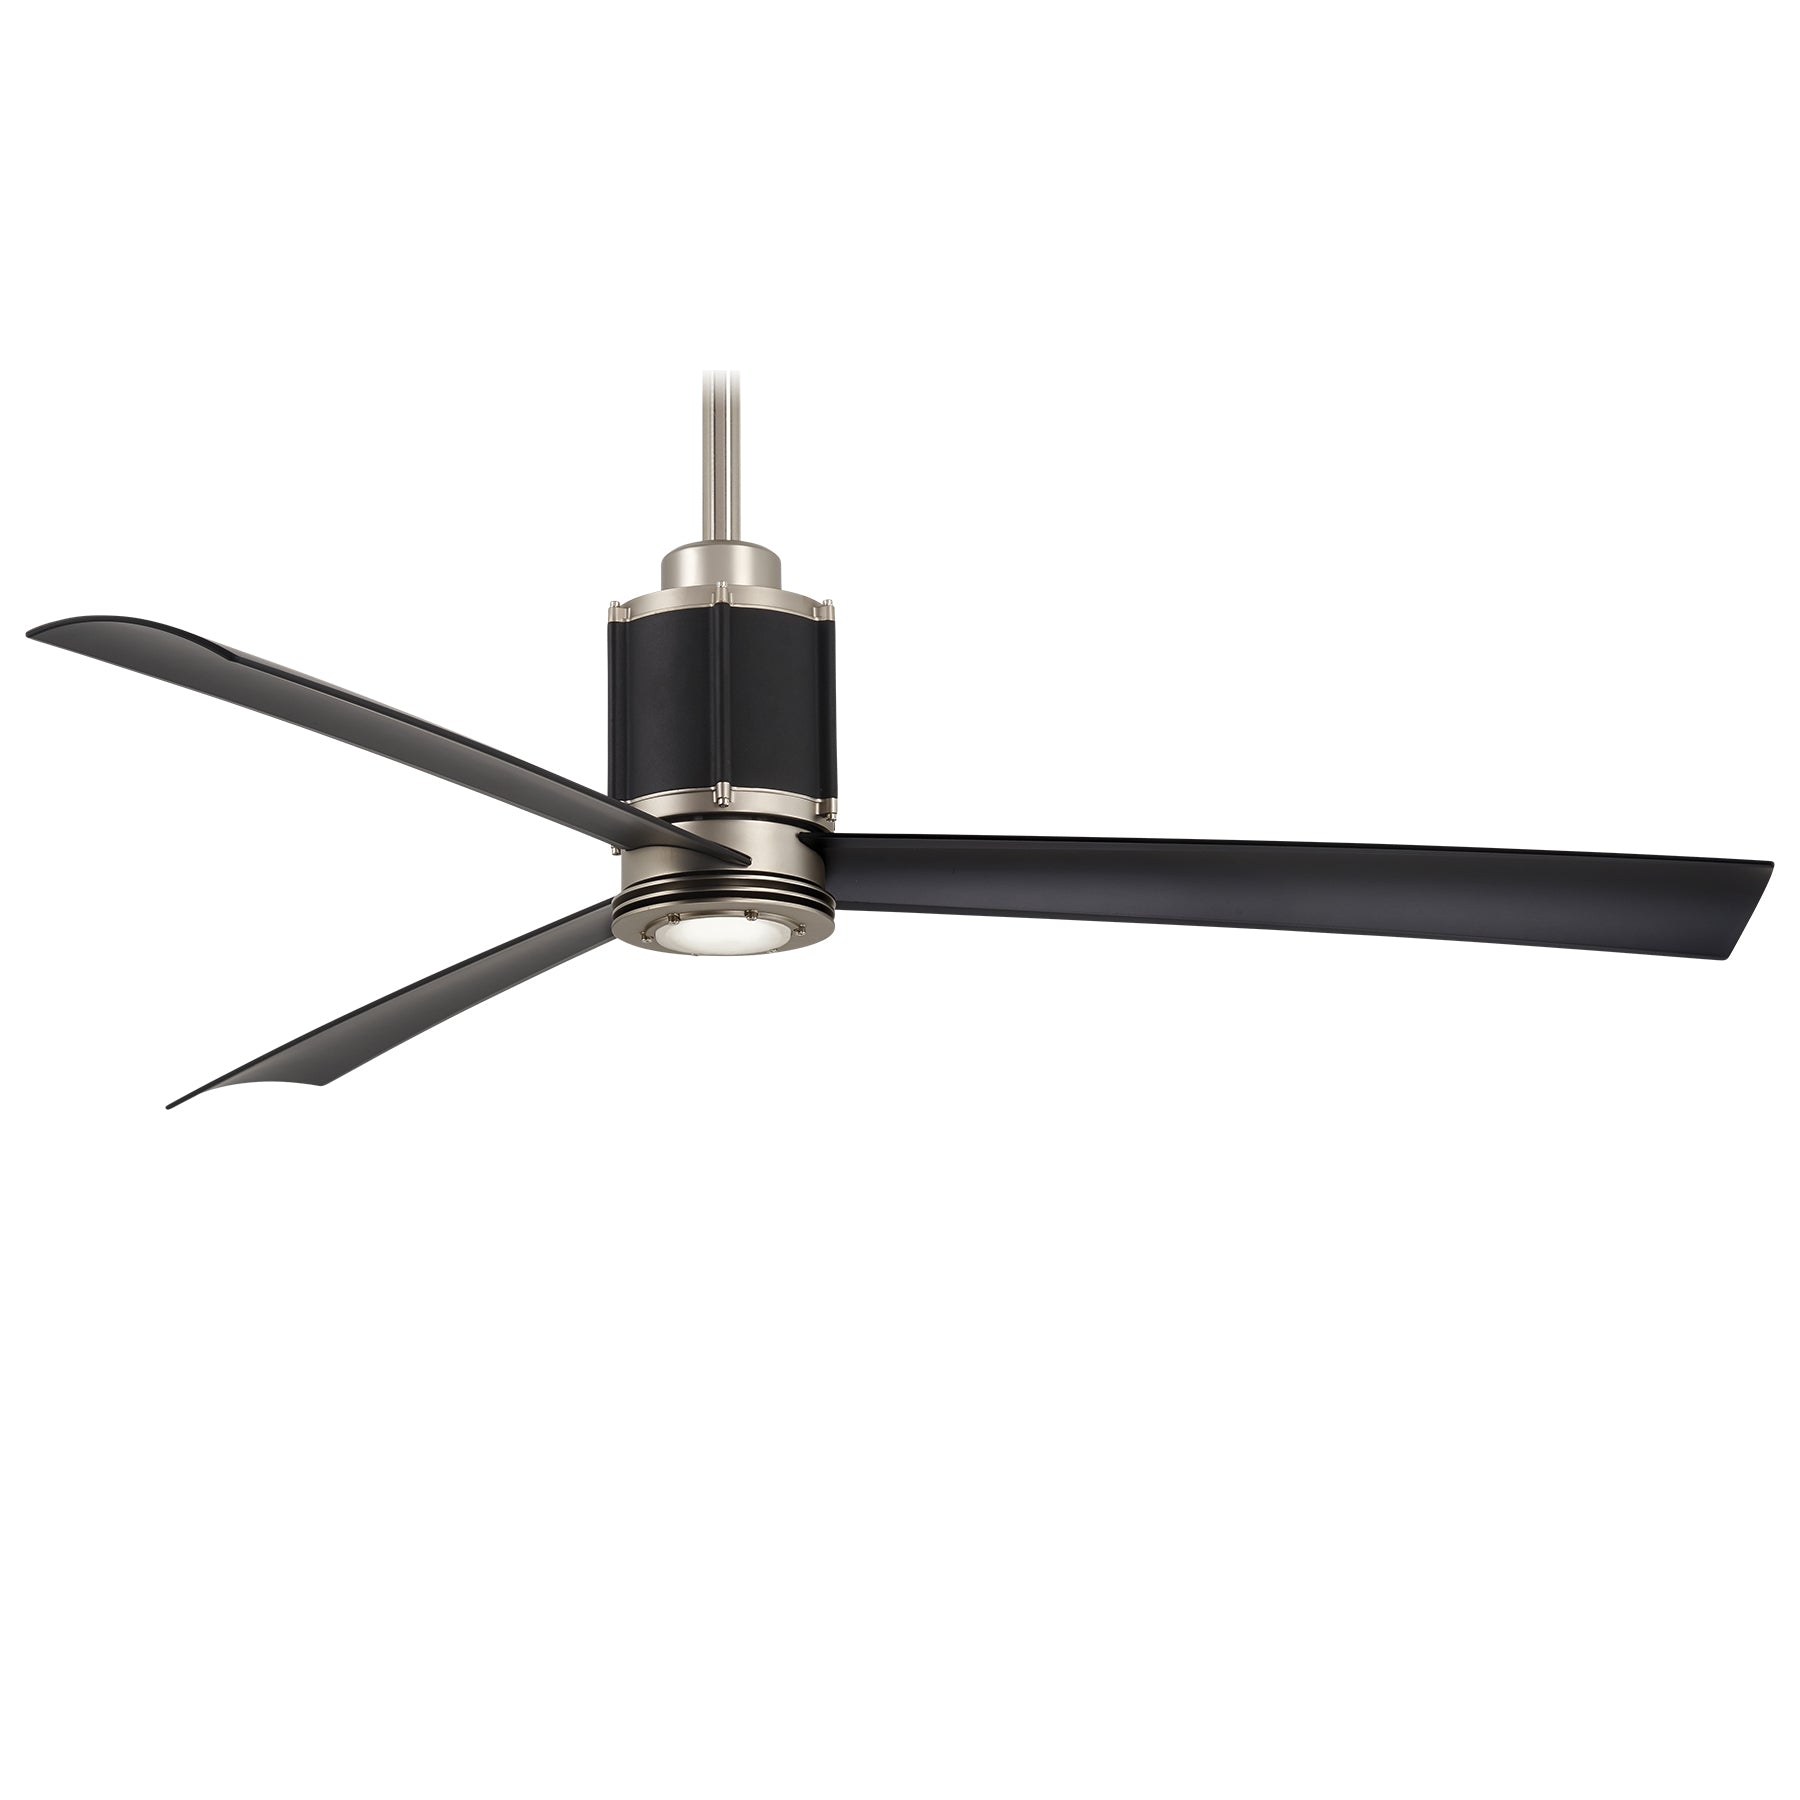 Minka-Aire Gear LED 54" Ceiling Fan Ceiling Fan Minka-Aire Brushed Steel and Sand Black Finish  